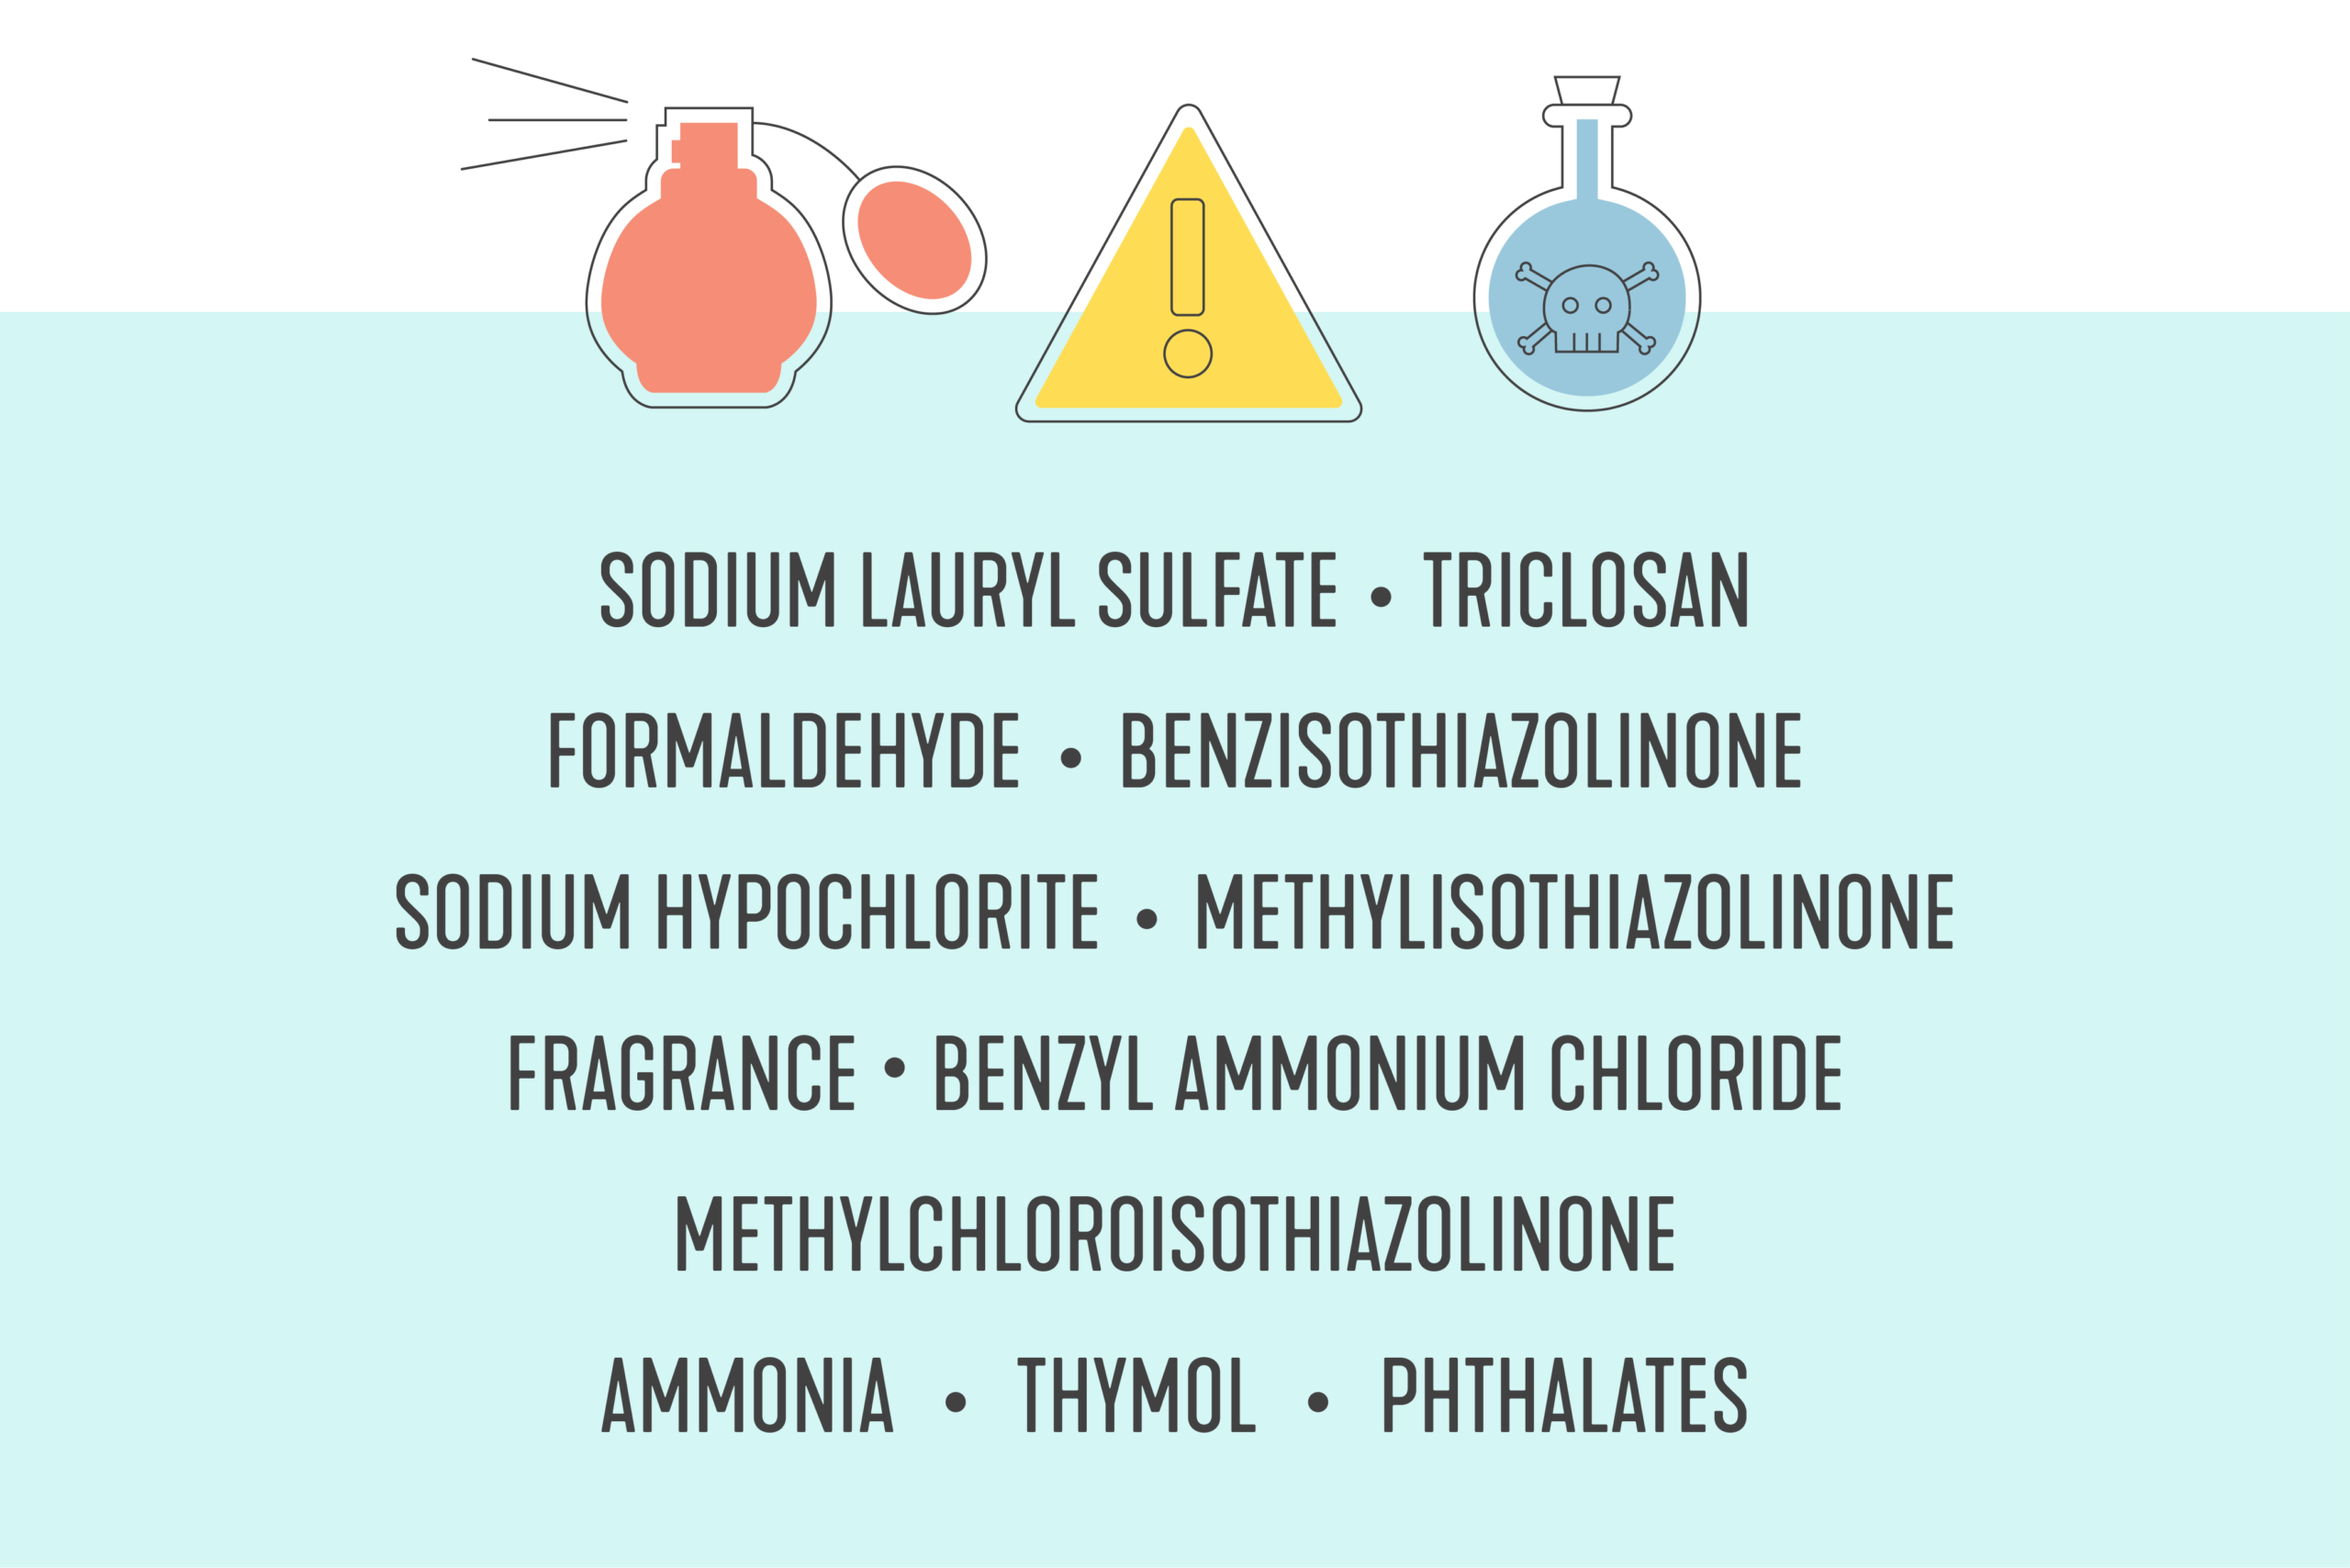 Top 10 toxic ingredients to avoid in your home